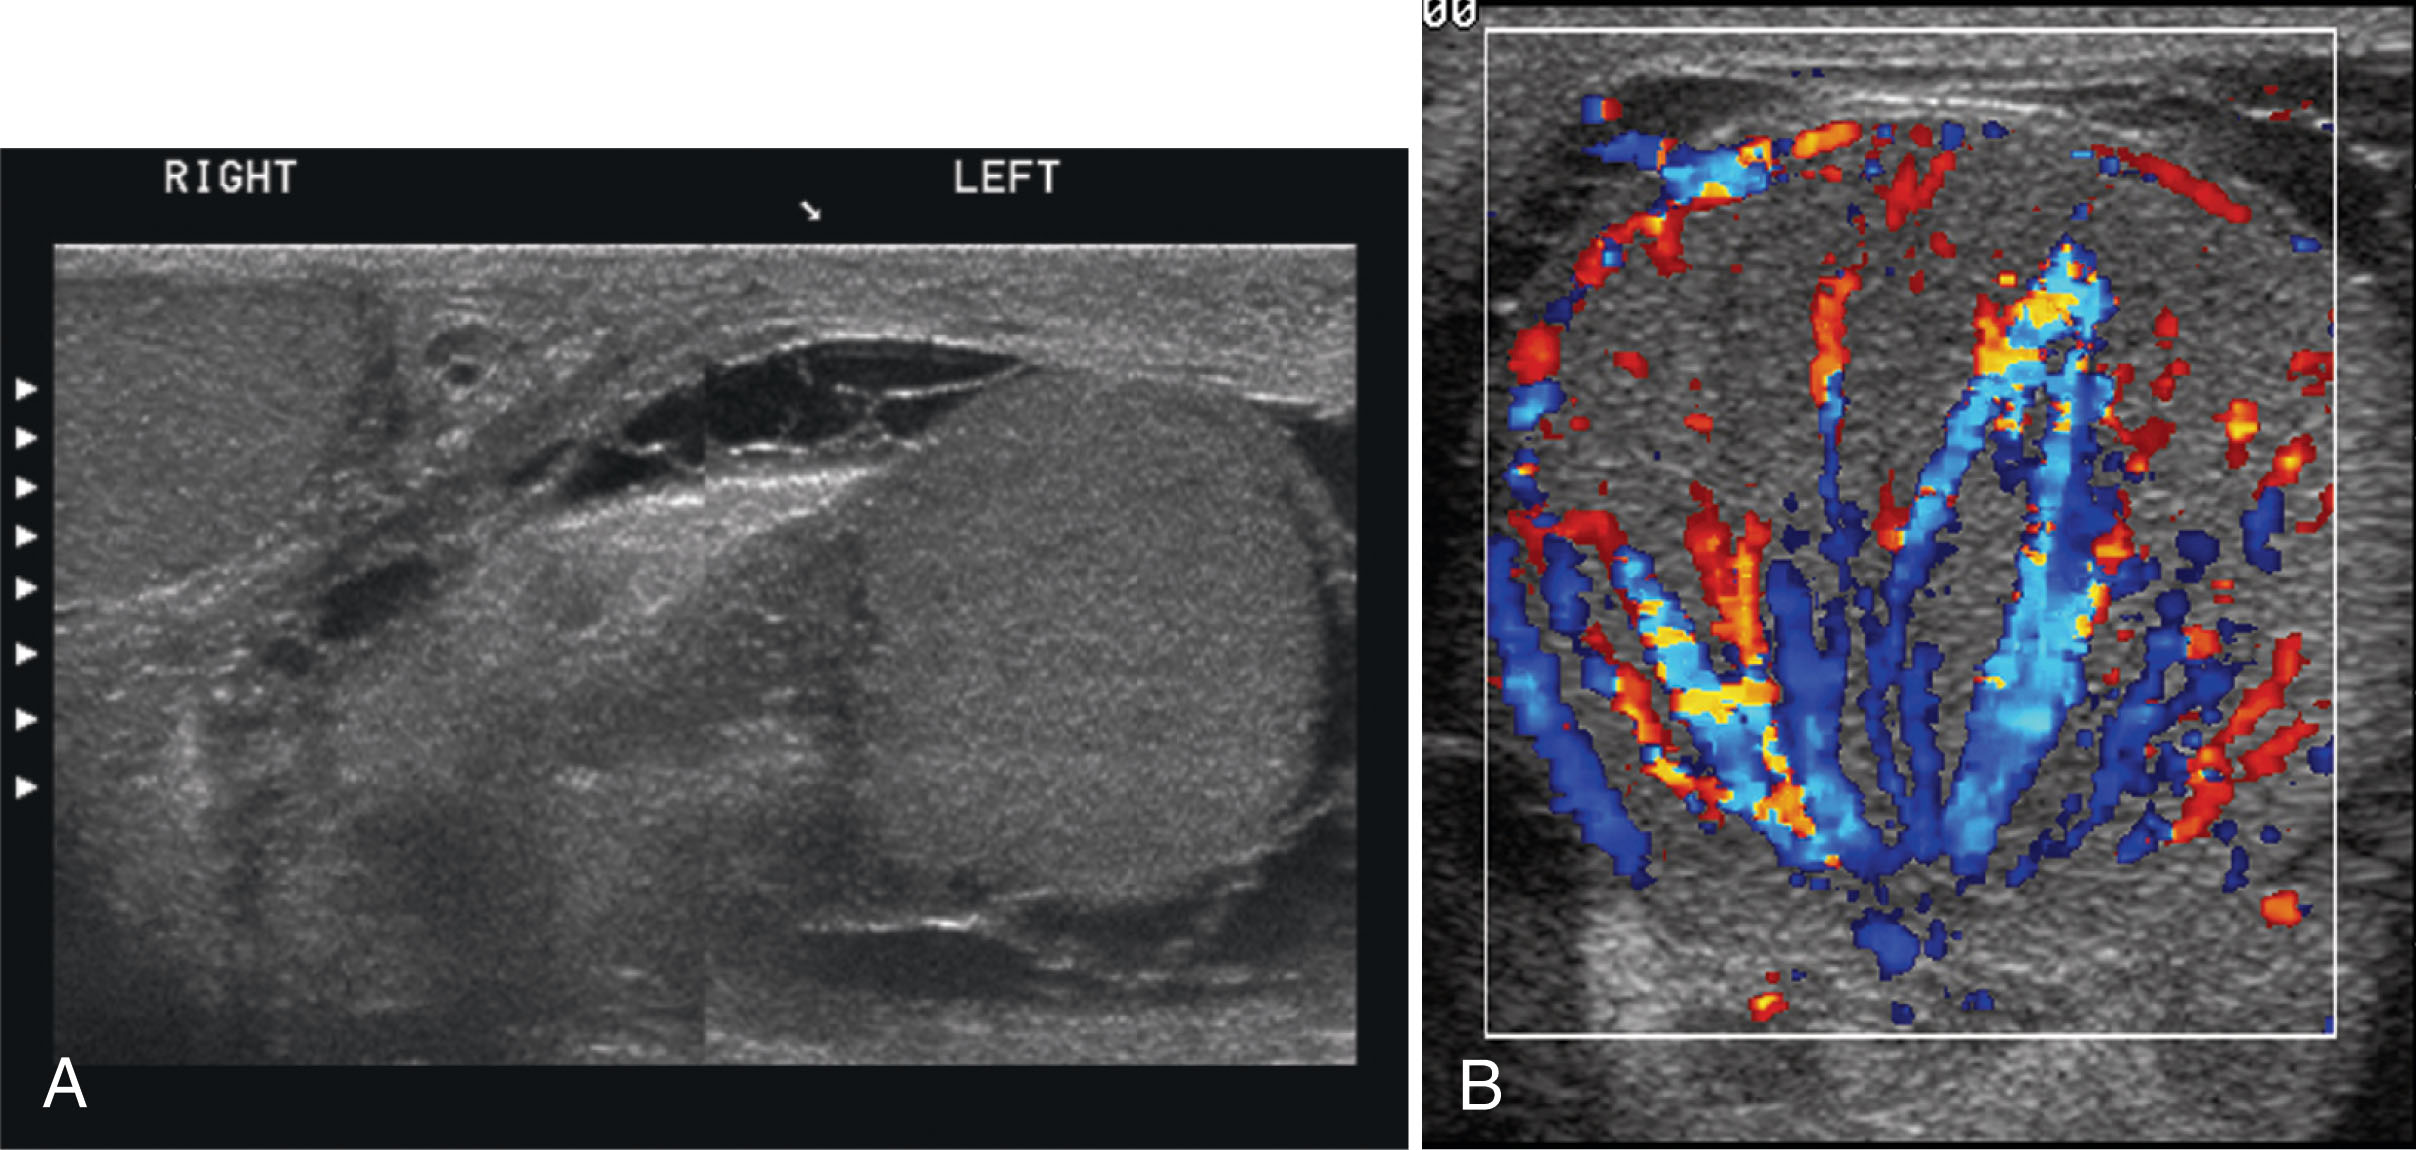 Fig. 23.16, (A) Orchitis in a patient presenting with severe scrotal pain and swelling. Transverse stitched ultrasound scan shows an enlarged left testis and a normal right testis. A complex hydrocele surrounds the left testis. Marked skin thickening is present on the left side compared with the normal right side. (B) Color Doppler shows hyperemic flow.